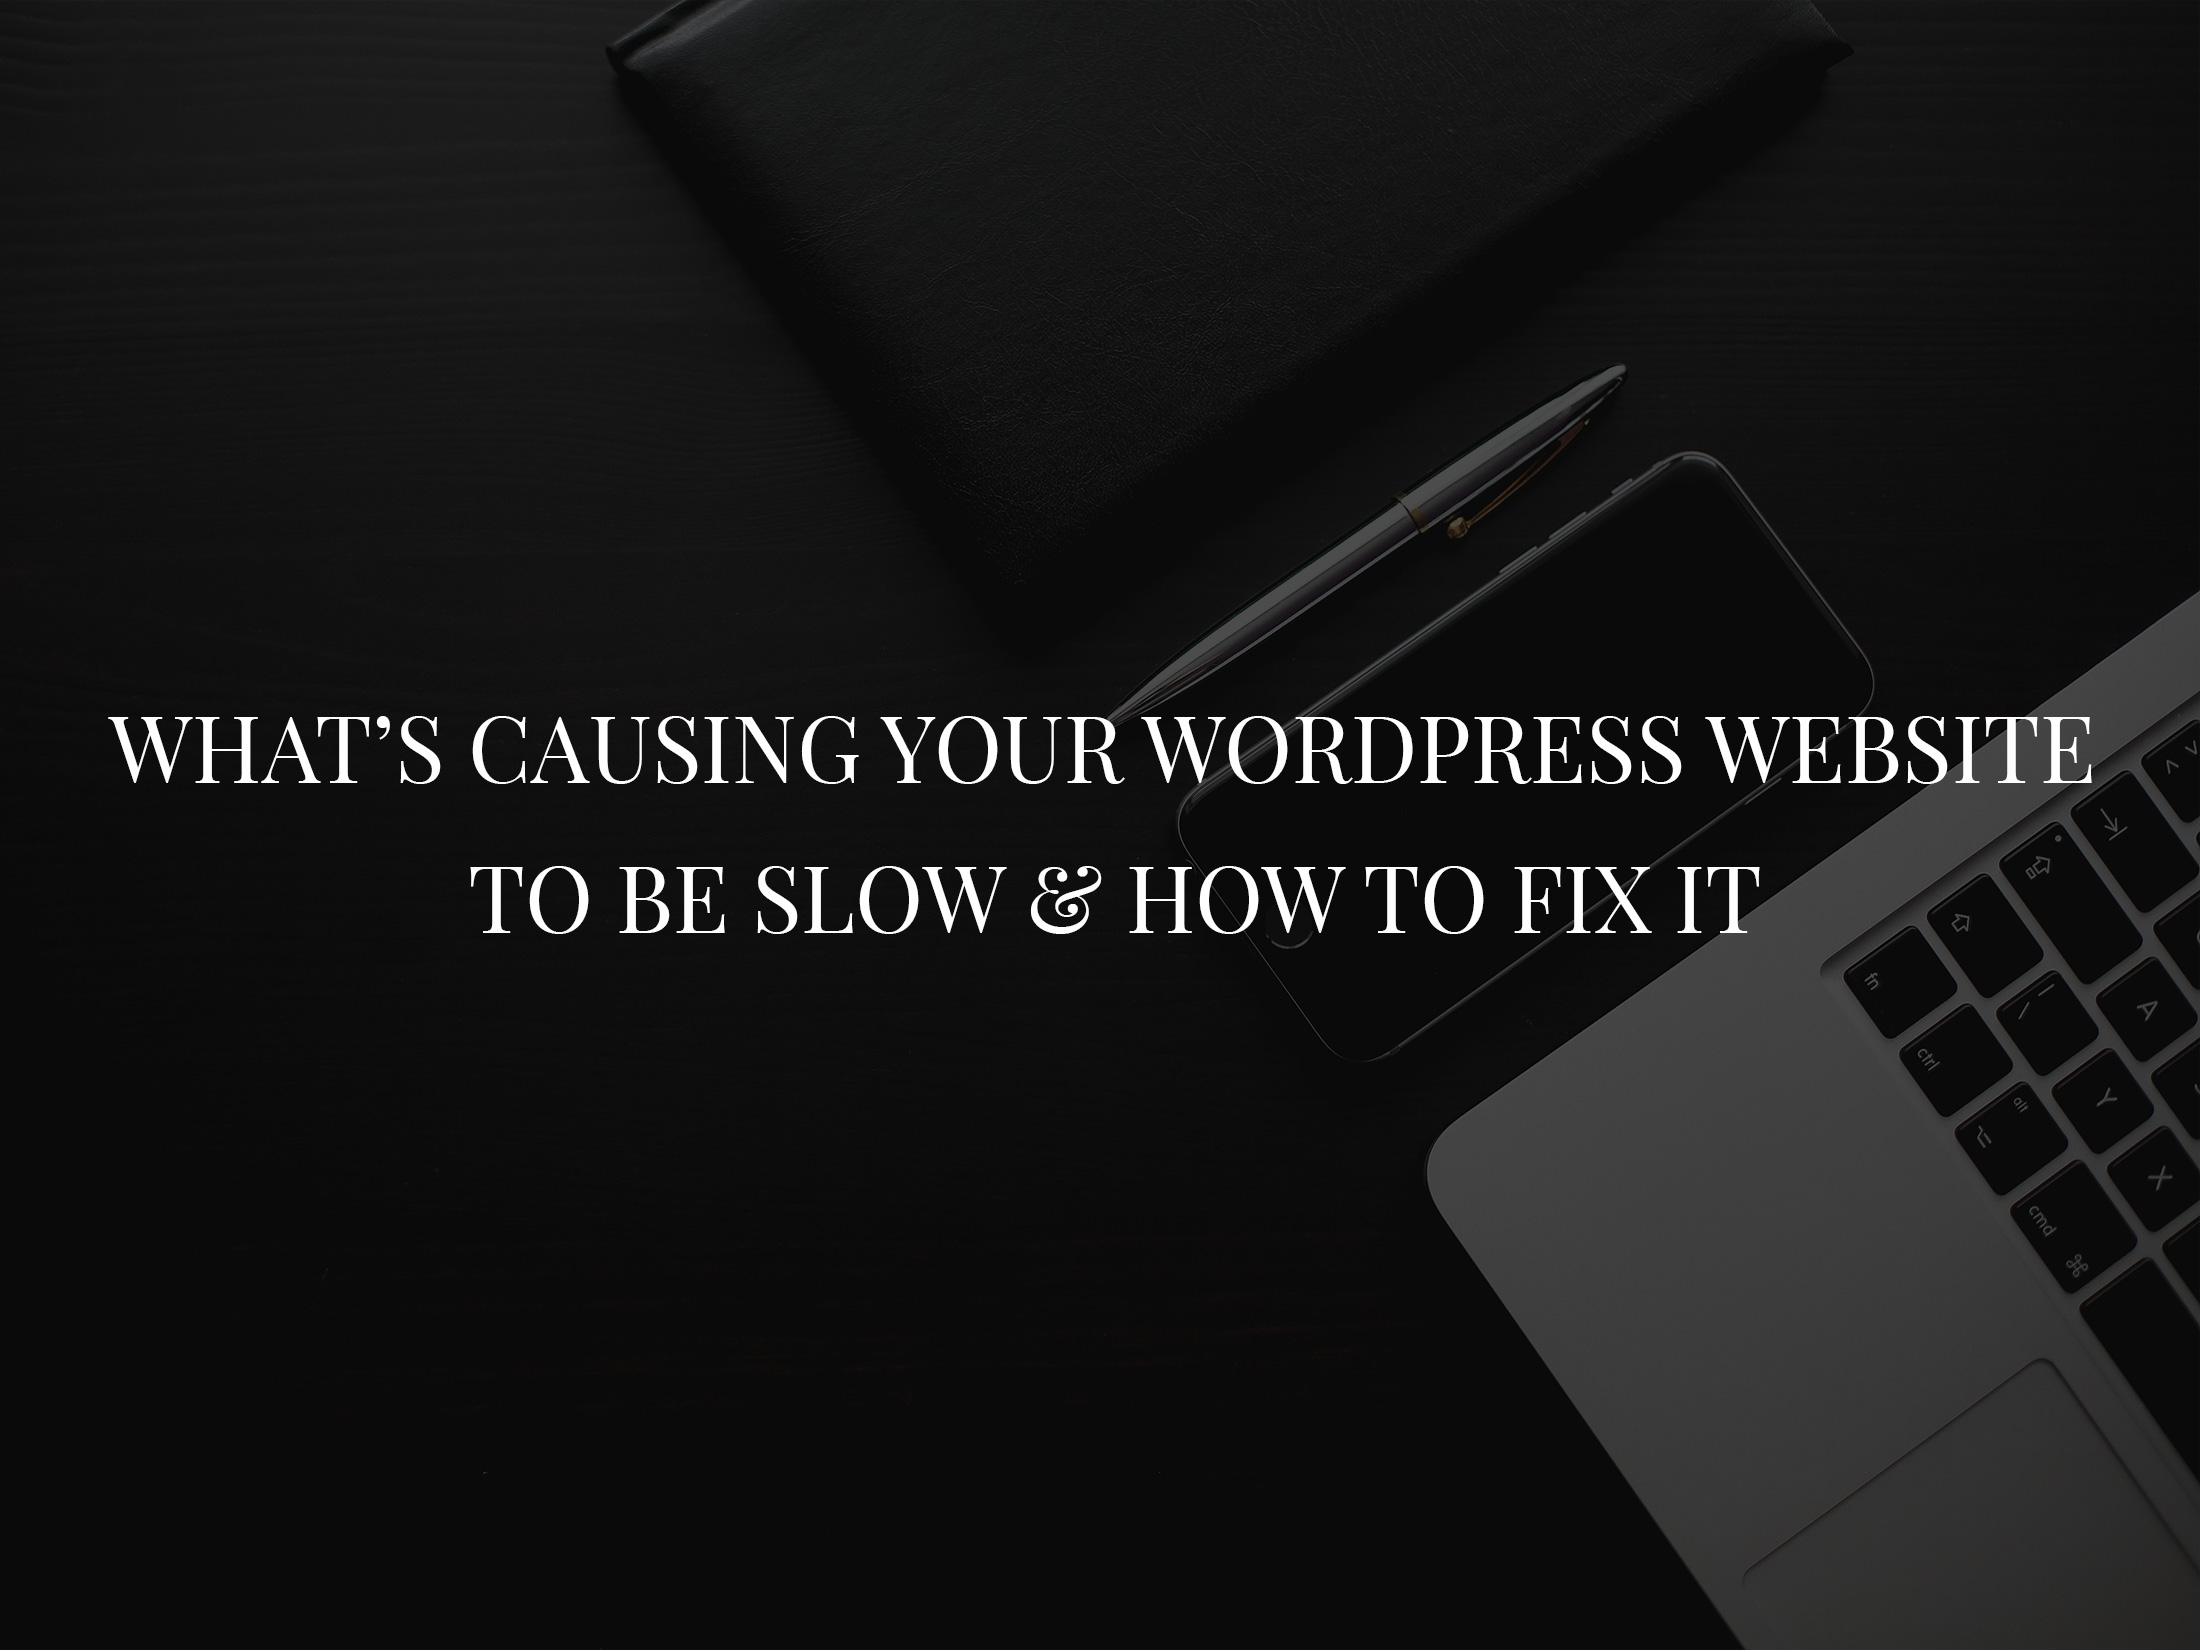 What’s causing your WordPress website to be slow and how to fix it